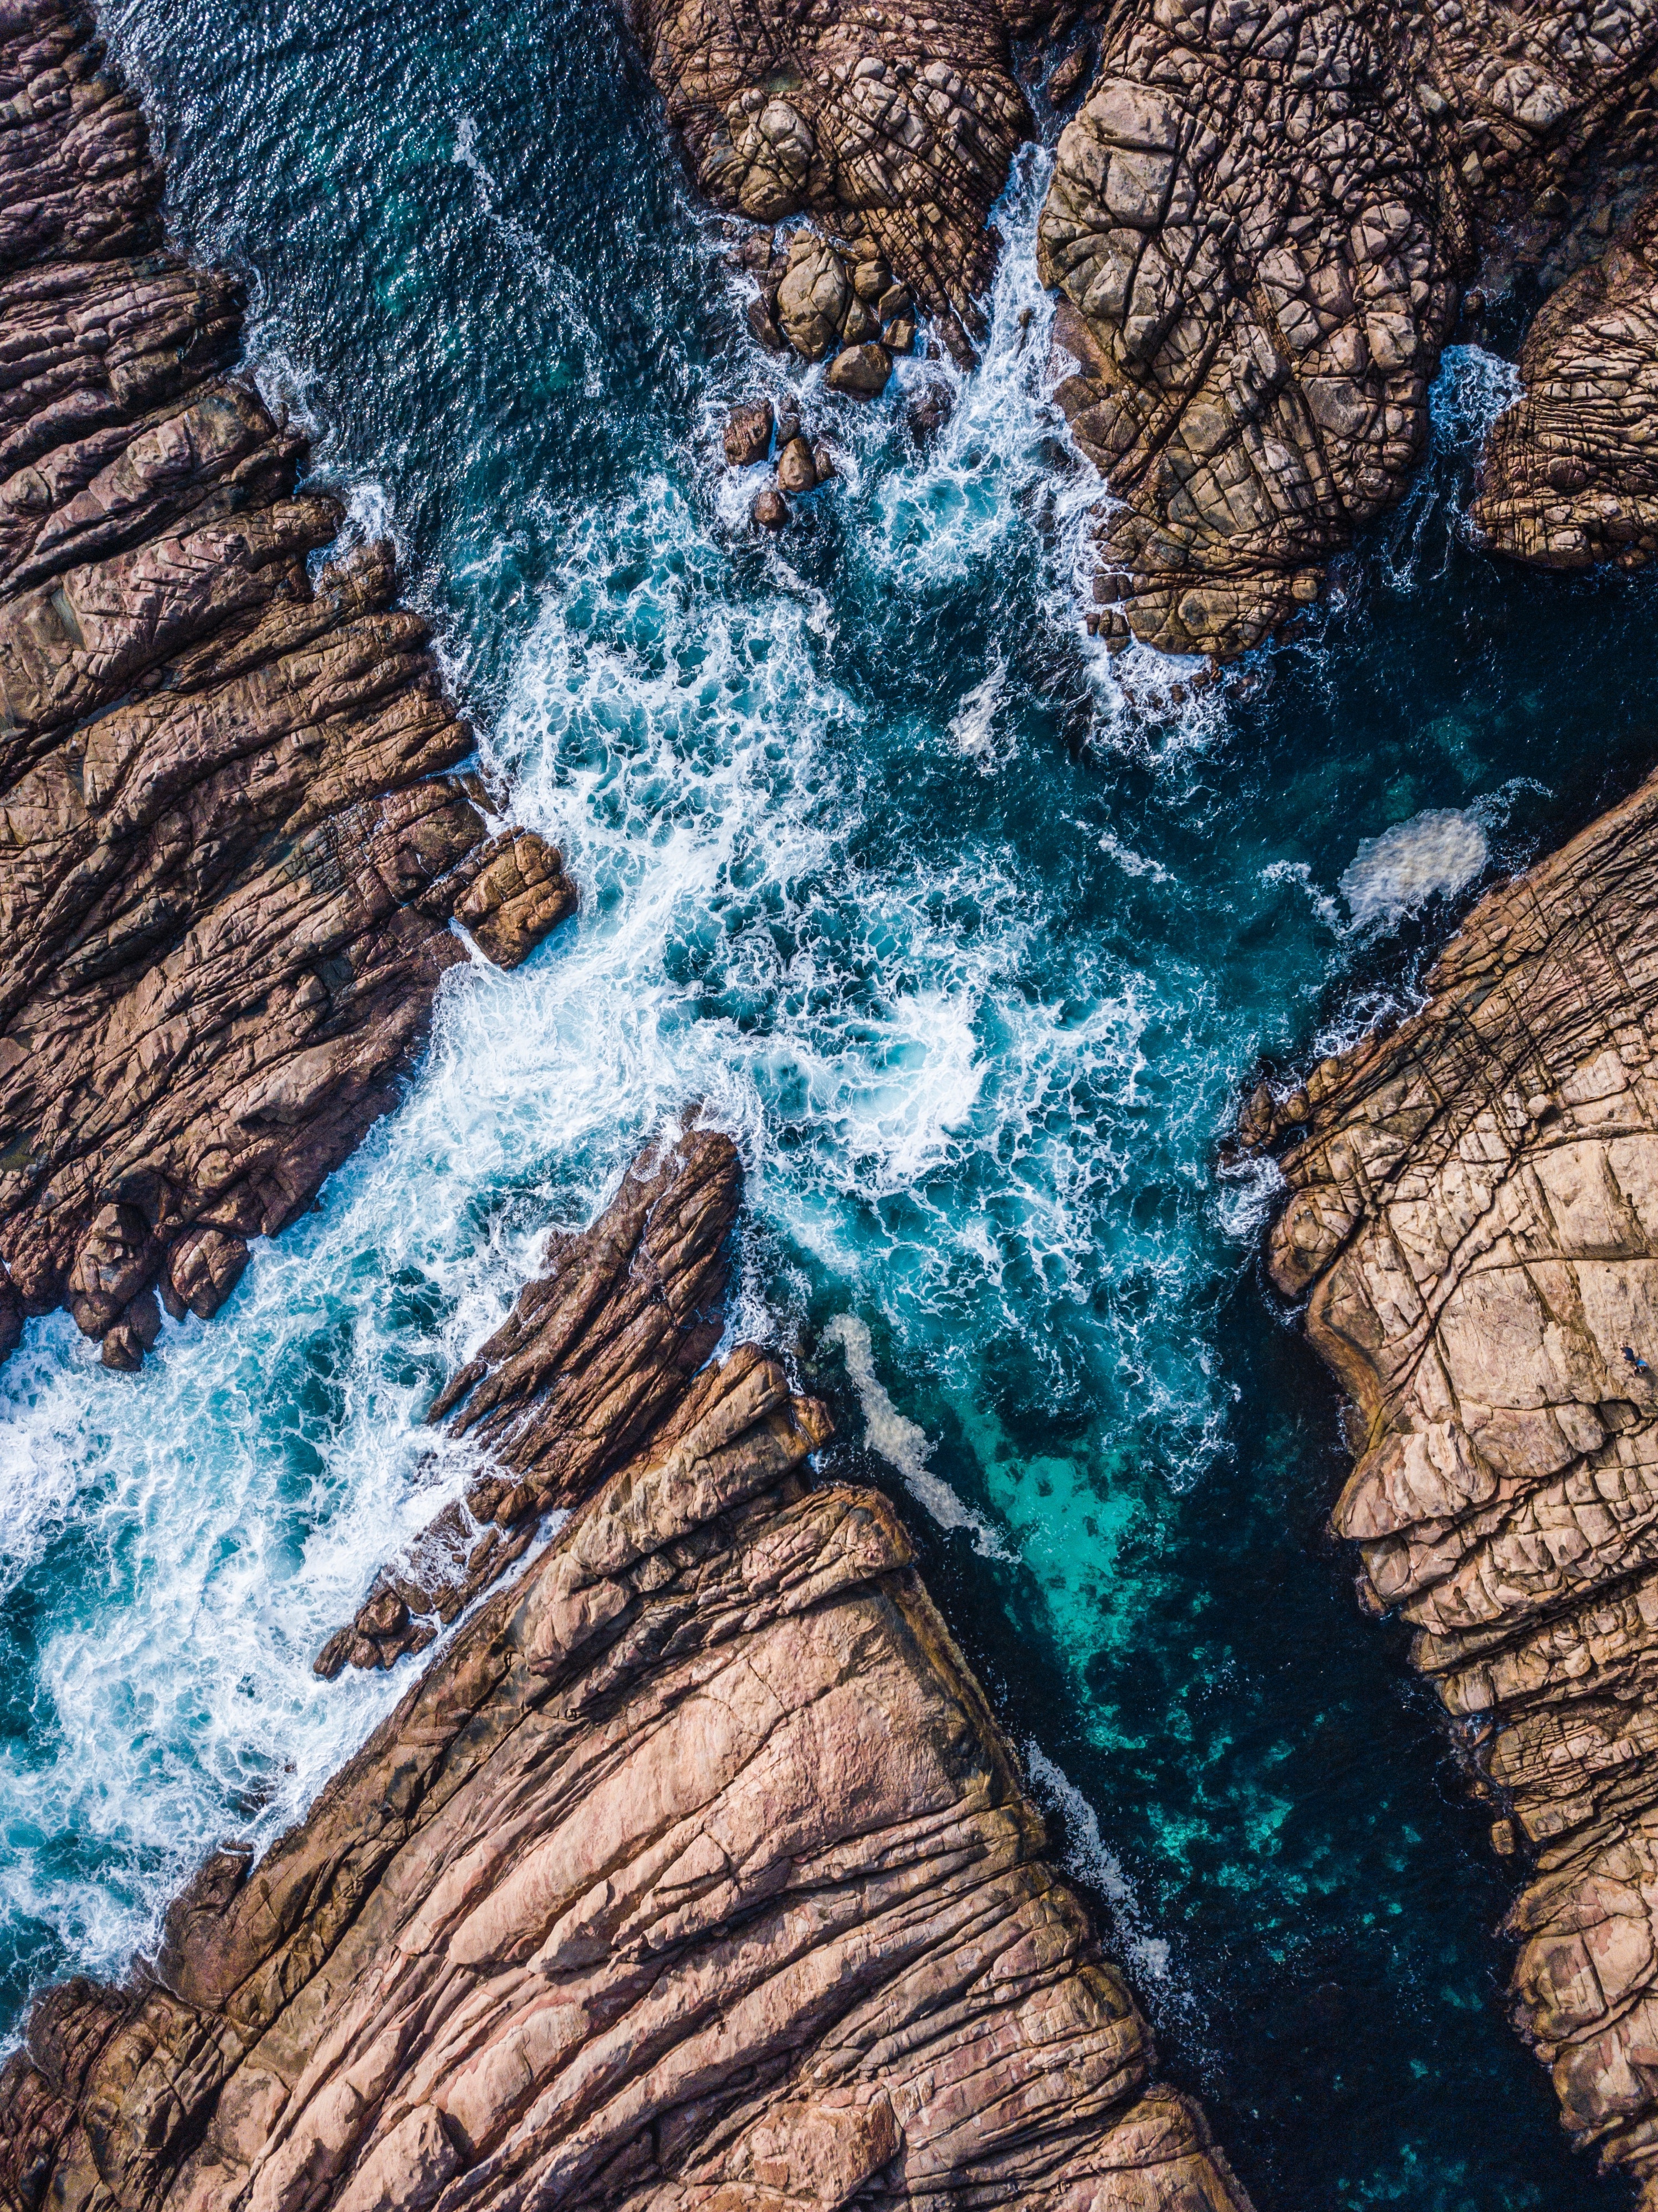 splash, waves, view from above, nature, rocks, ocean